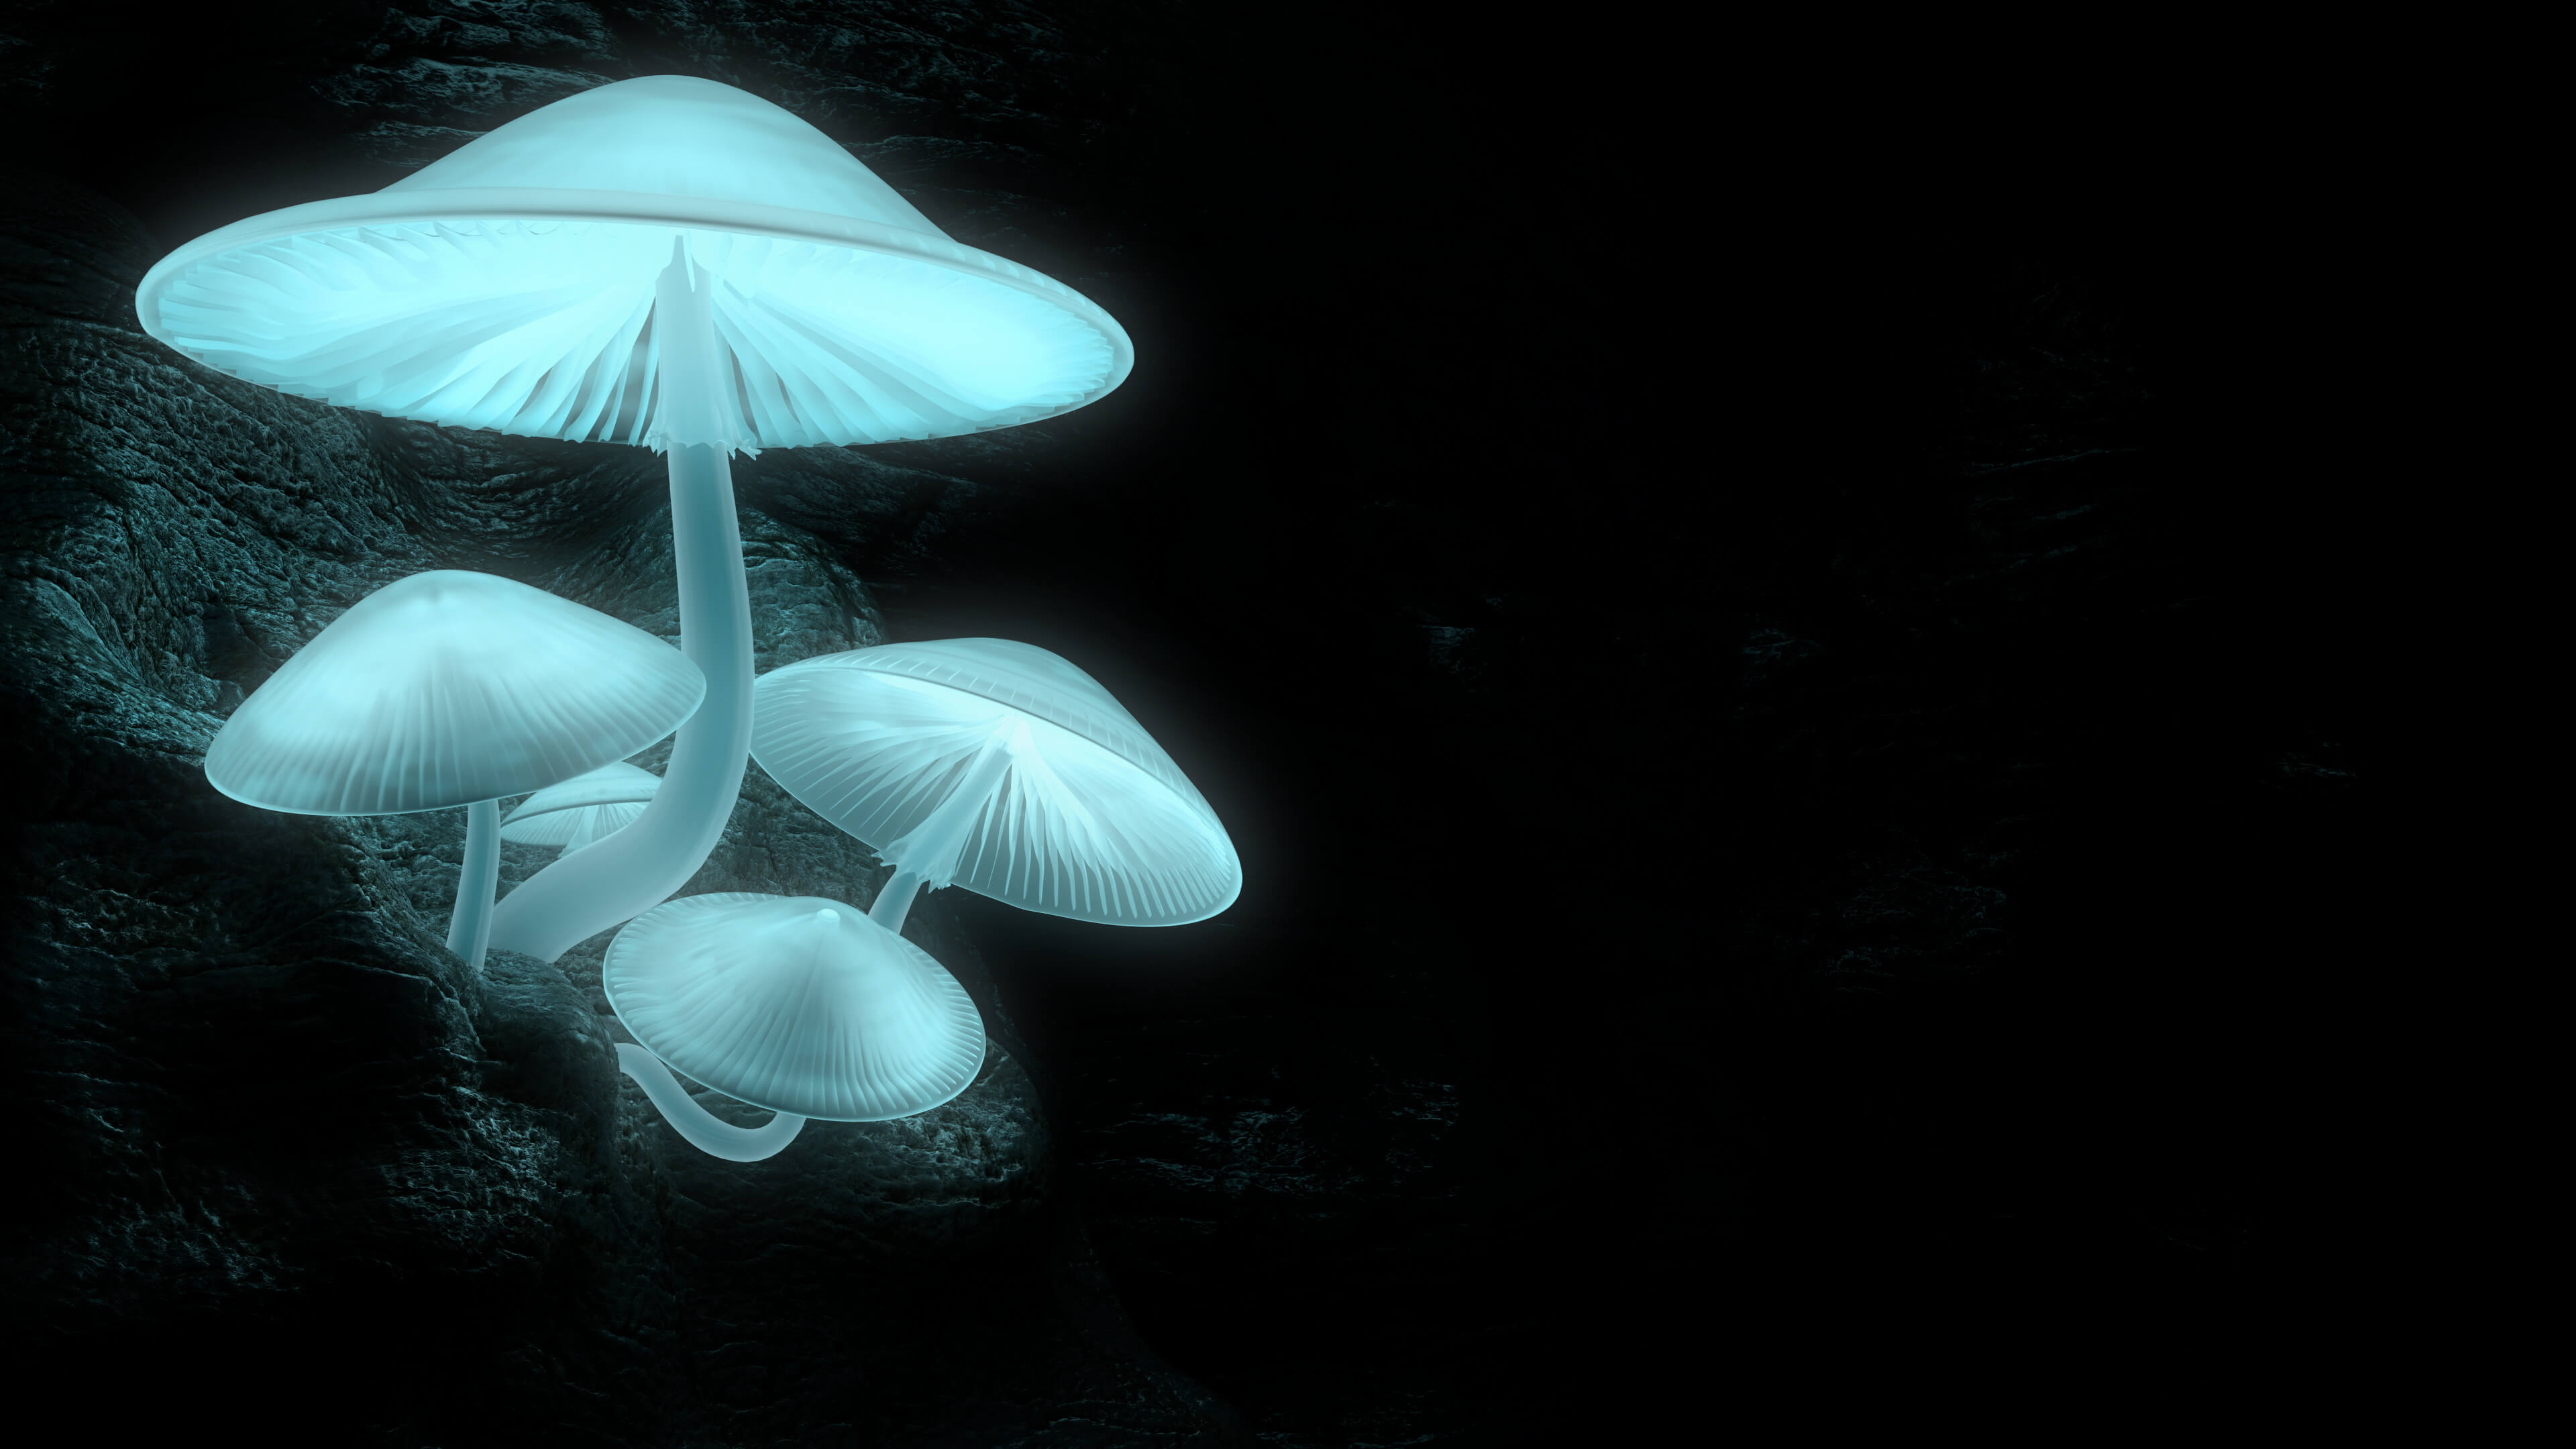 Mushrooms with large gills sprout from a rocky outcropping. They appear to glow a bright, soothing blue.